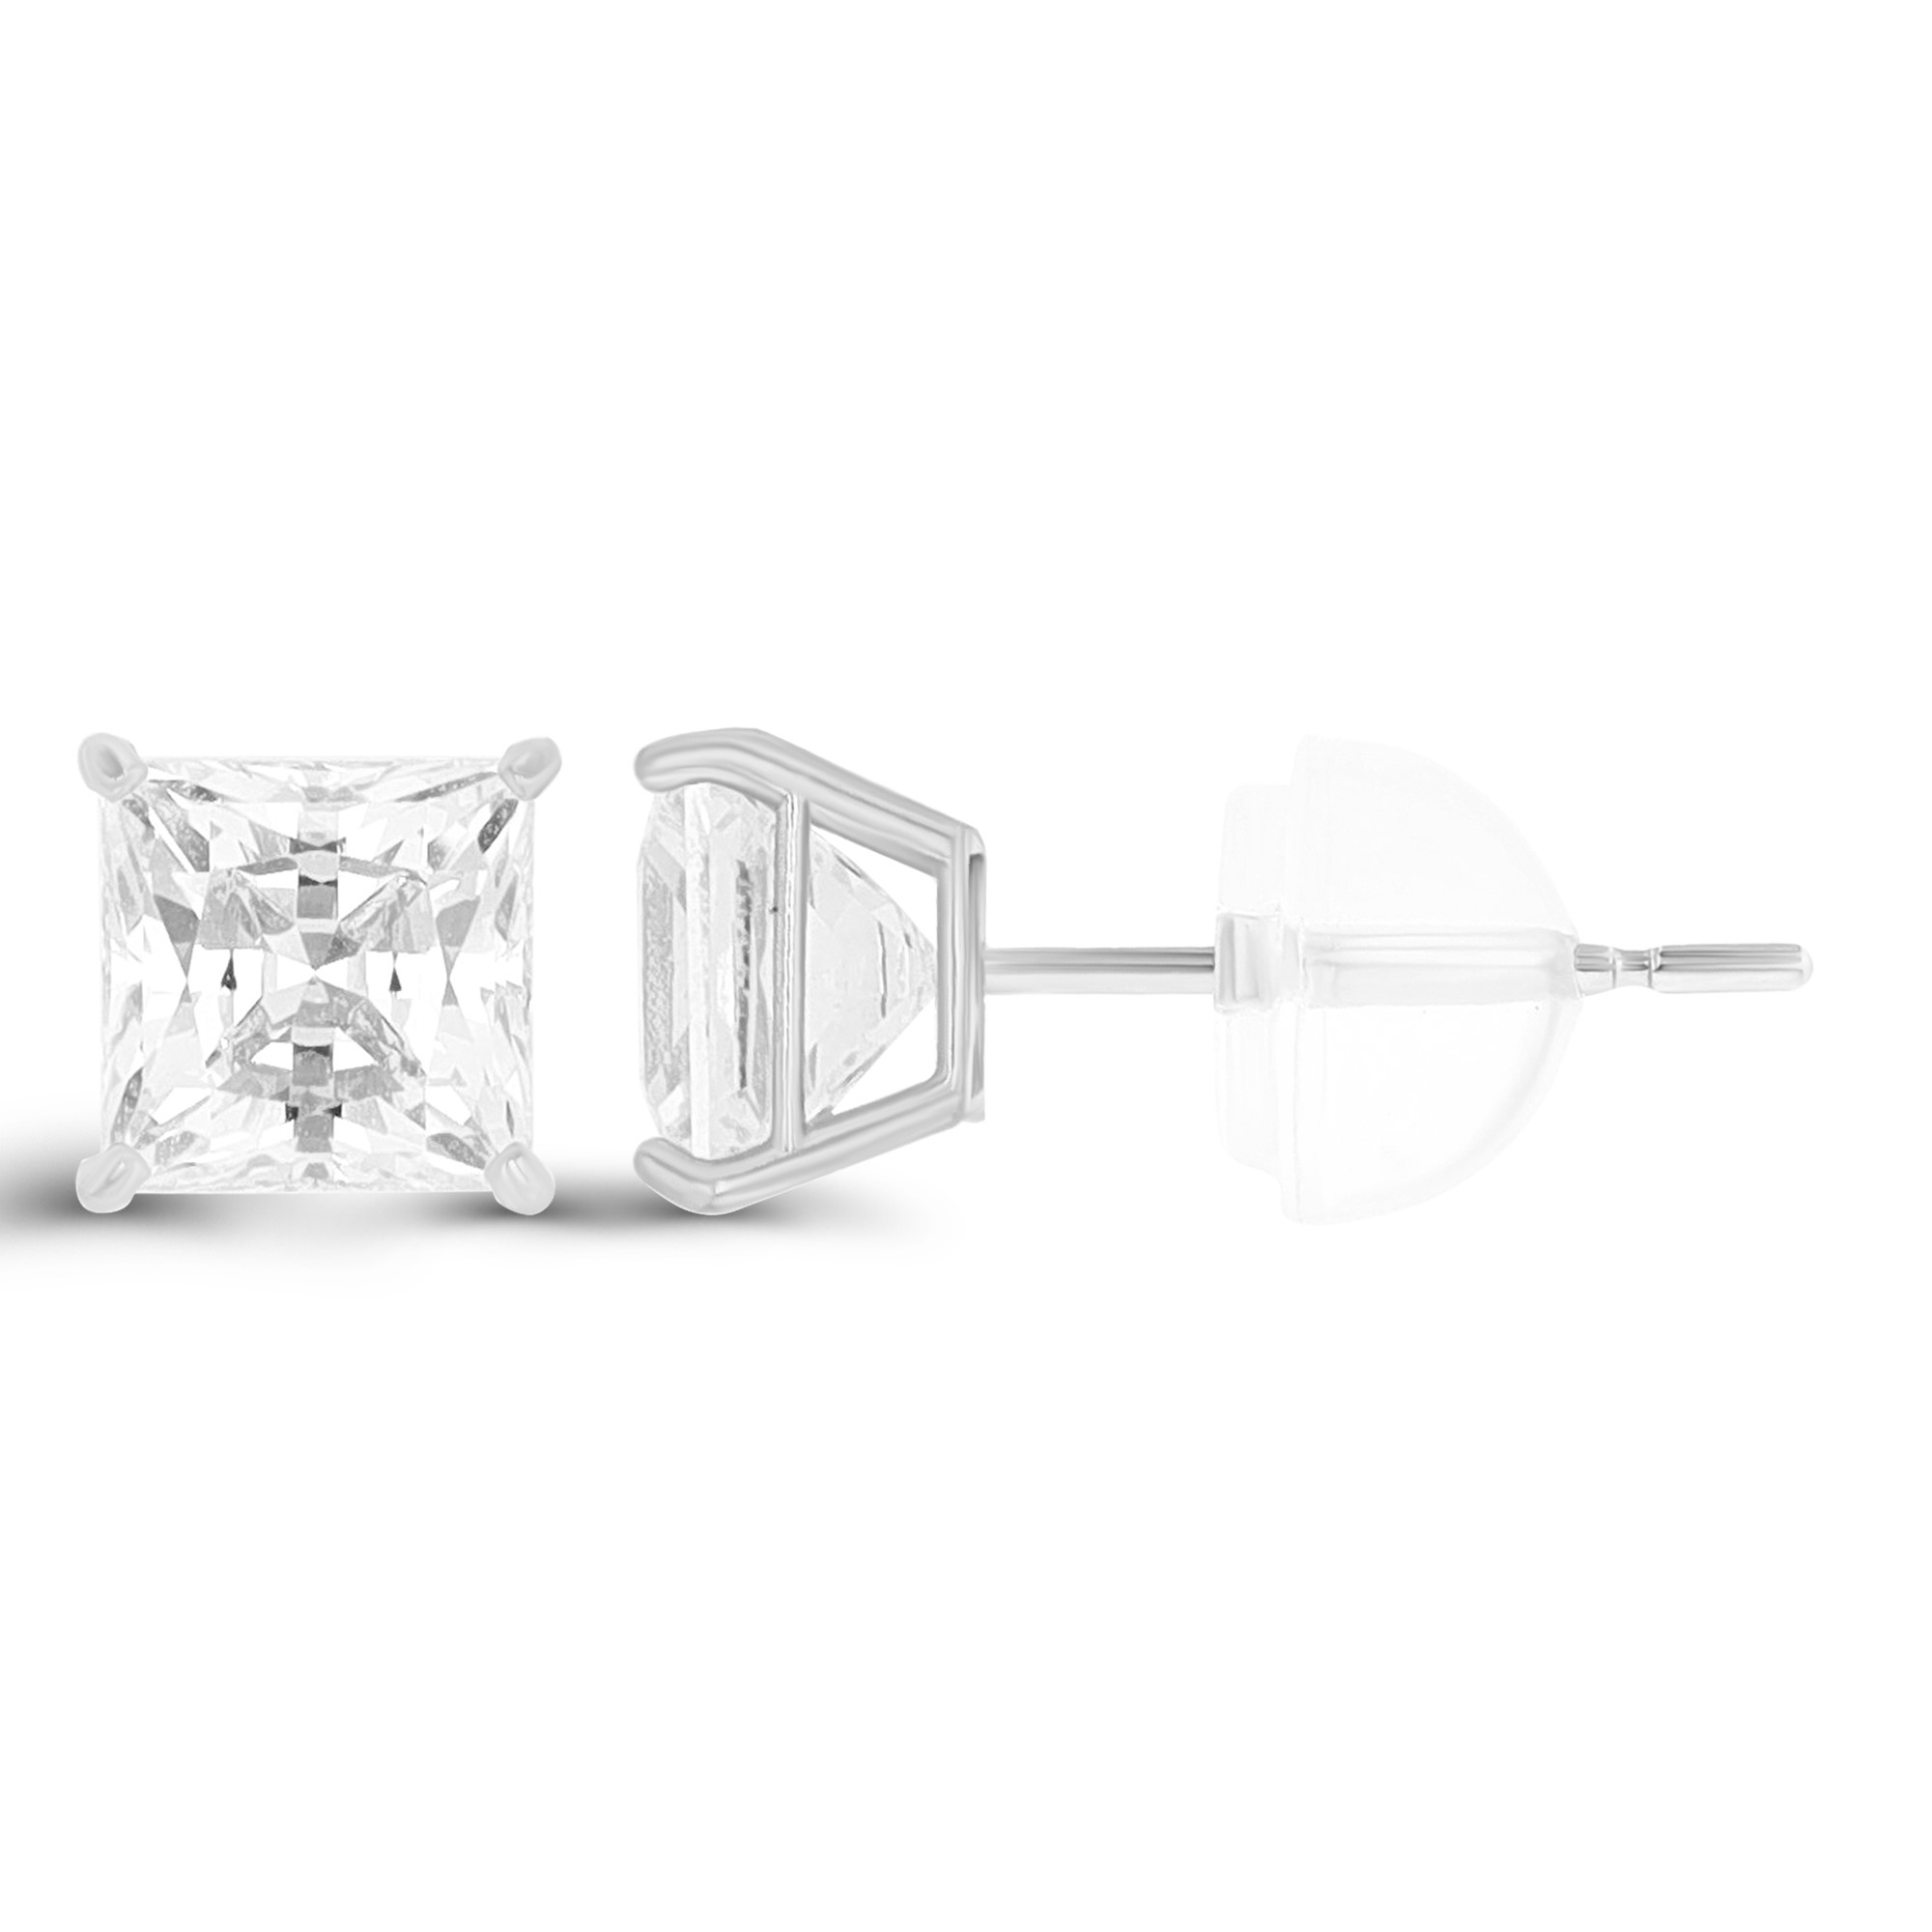 14K White Gold 6mm Sq White Swarovski Zirconia 4-Prong Cast Basket Solitaire Earring & Silicone Bubble Back